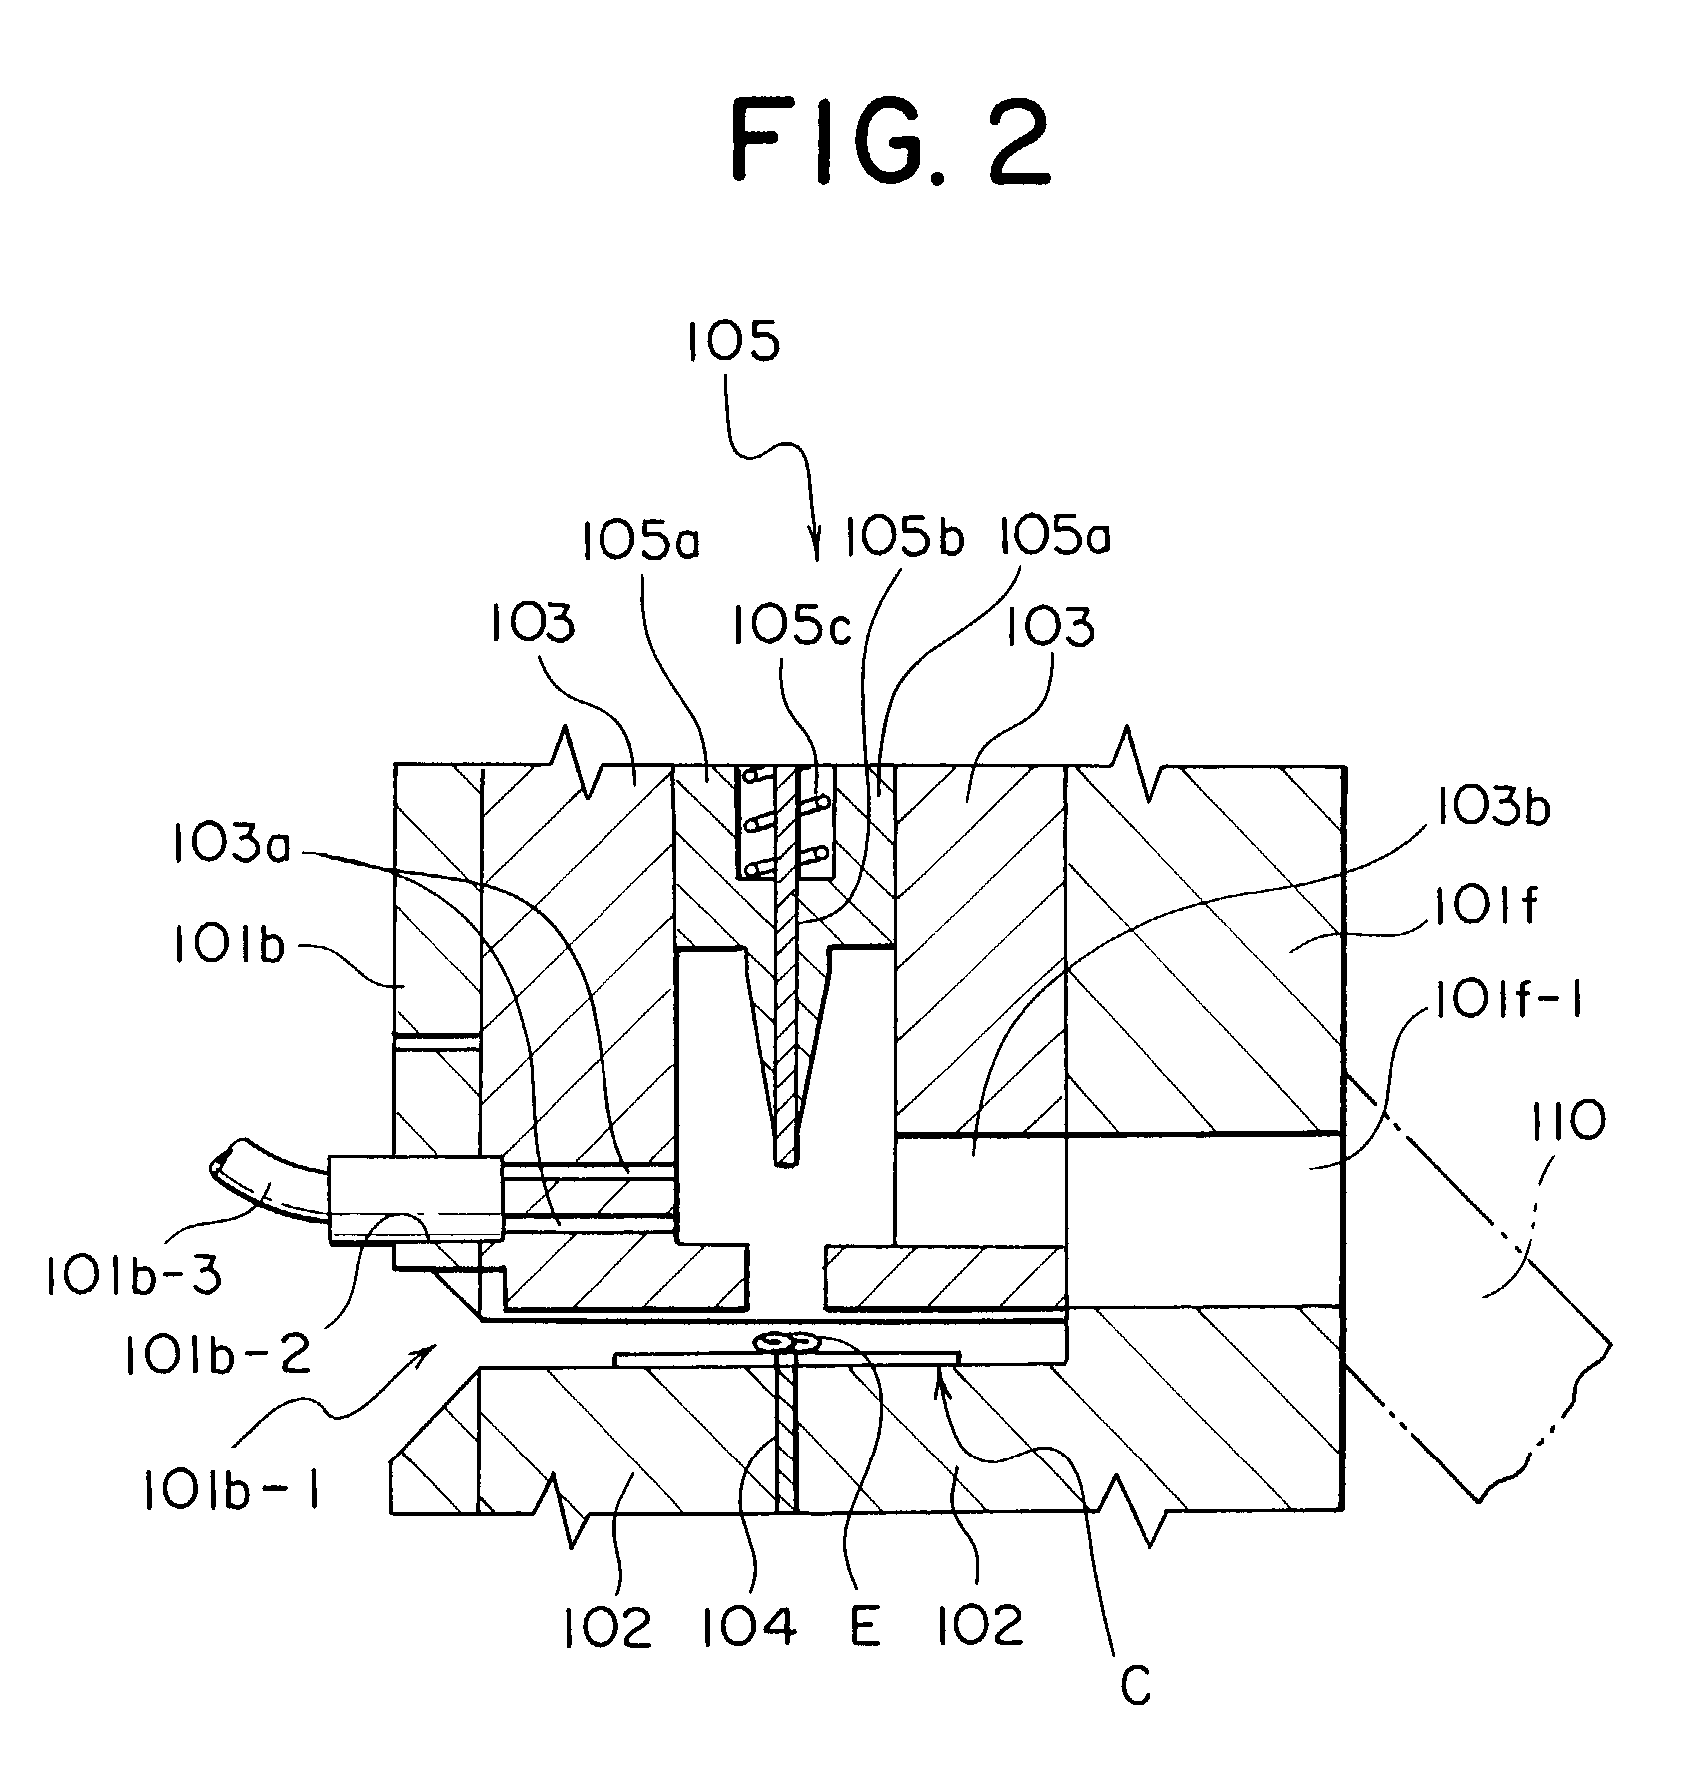 Space forming apparatus for a slide fastener chain